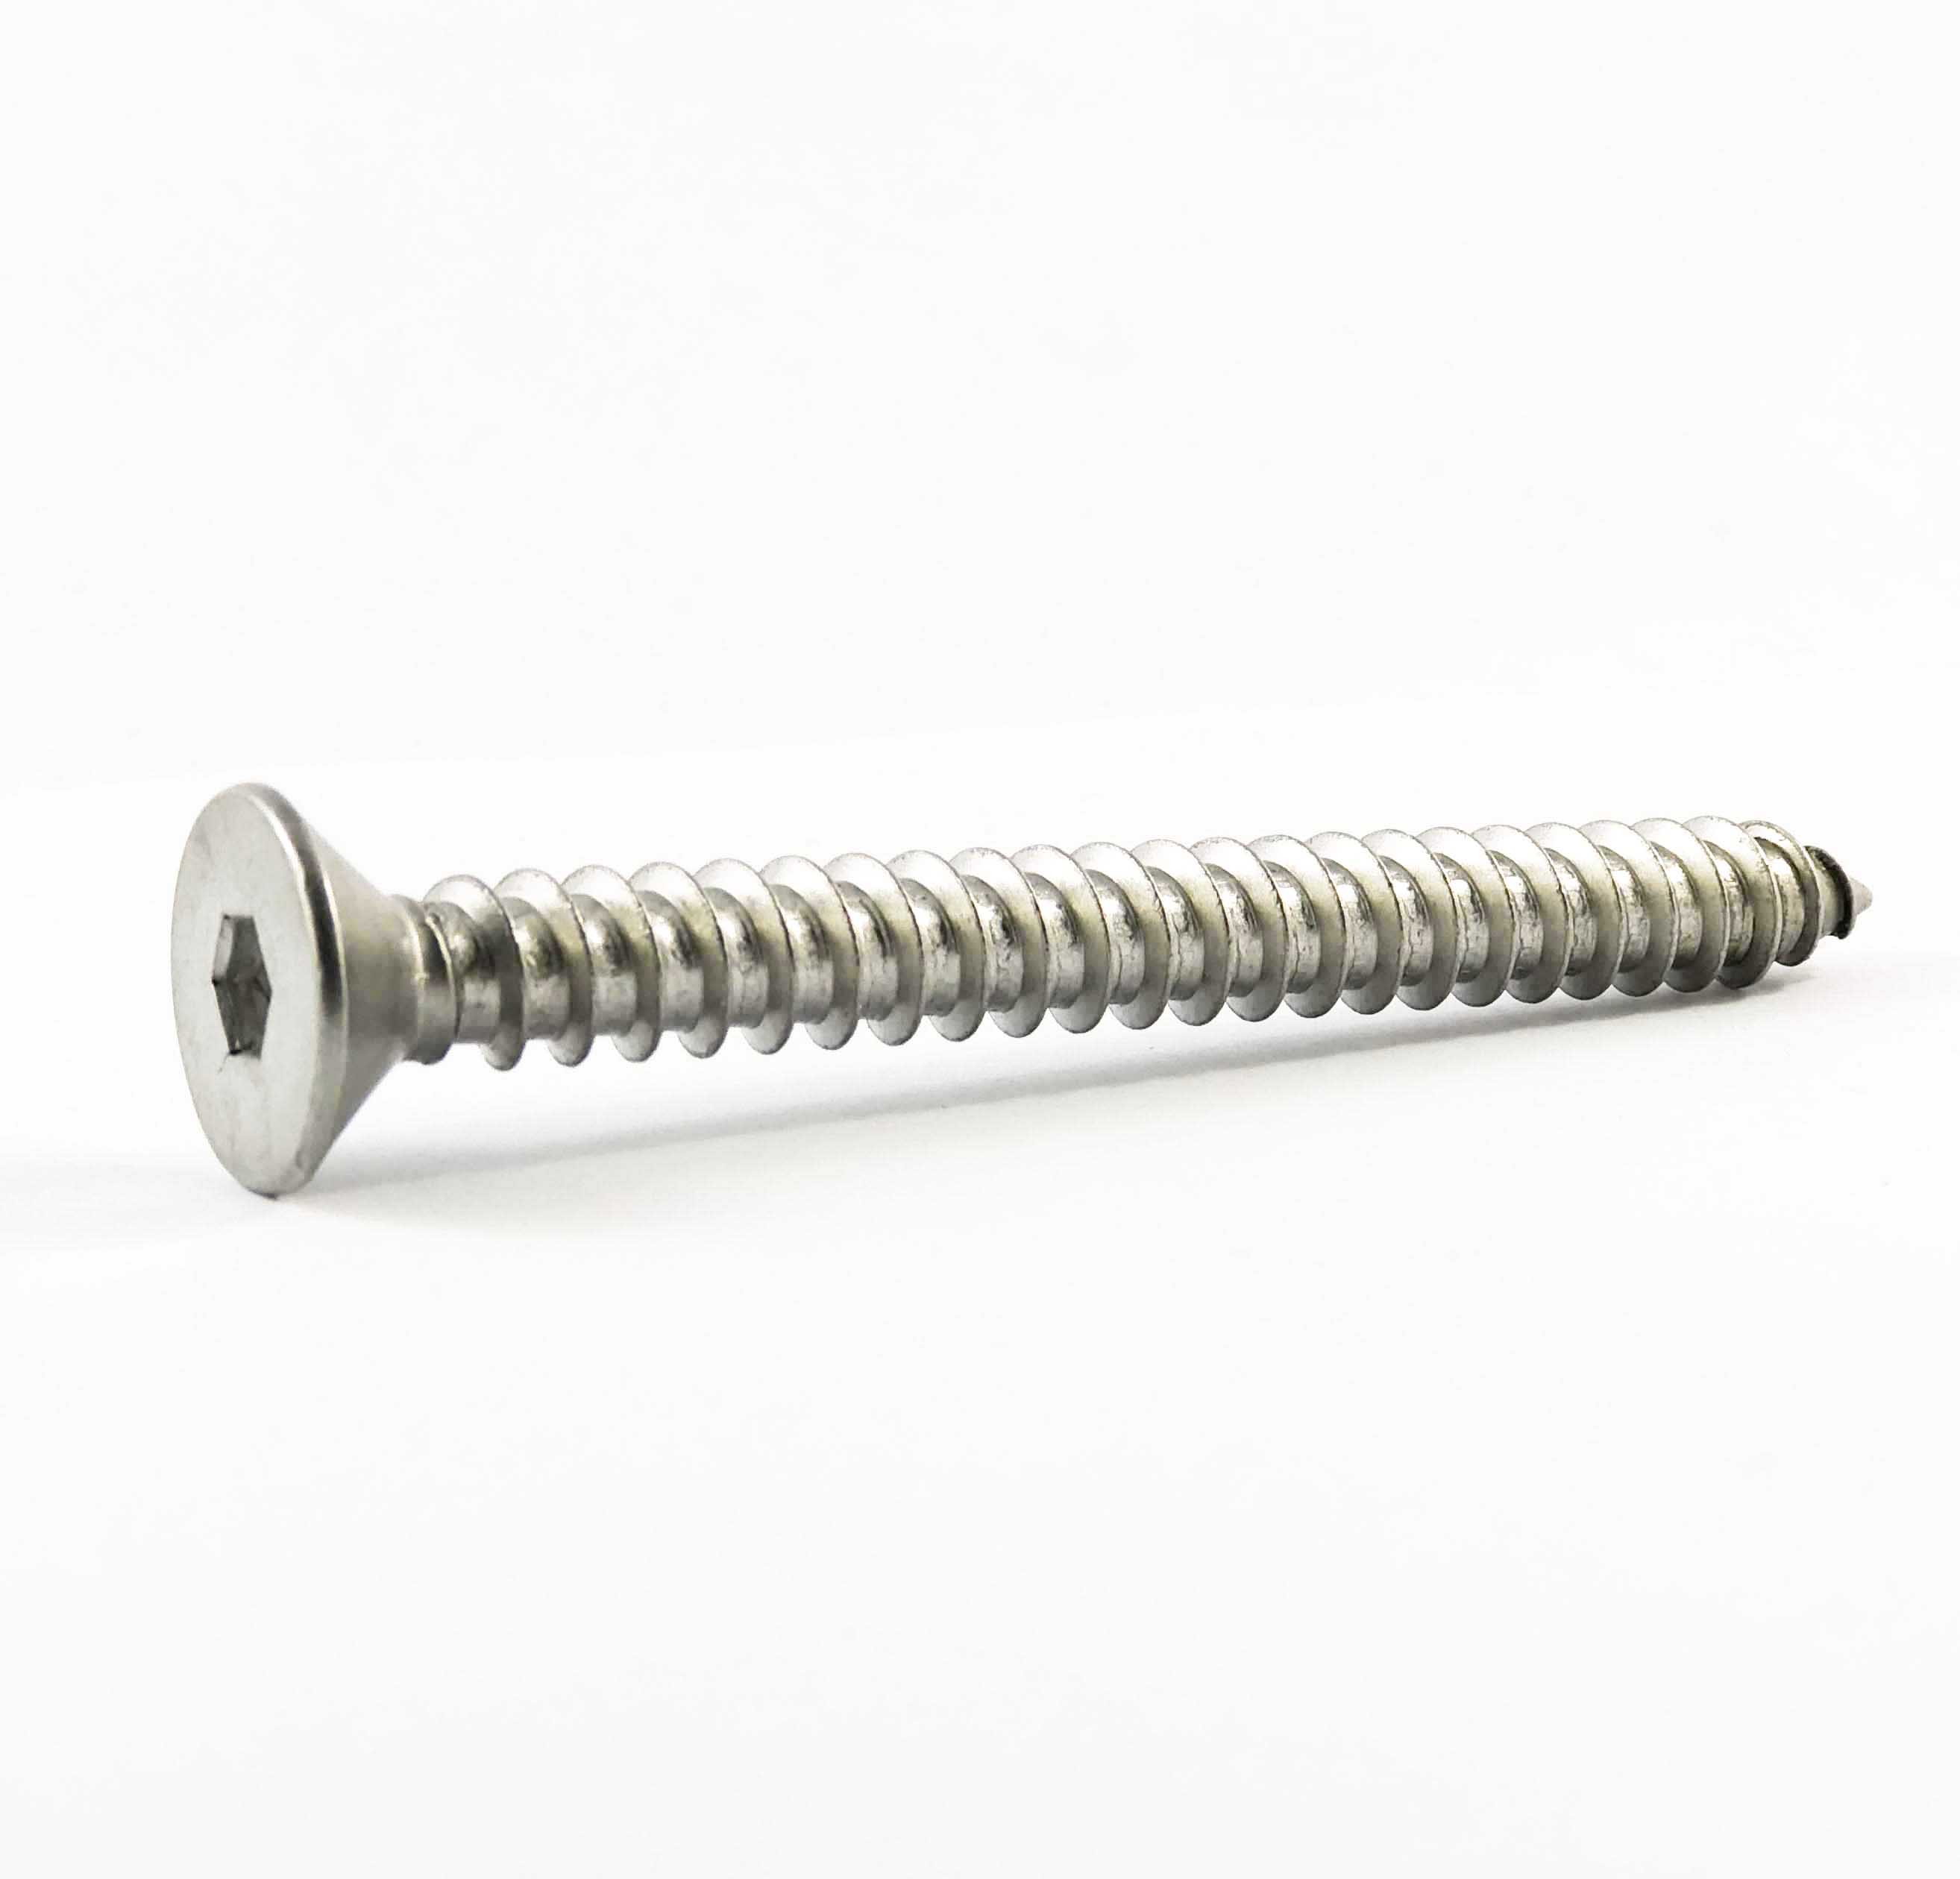 Coach Screw M10x100mm Countersunk Stainless Steel